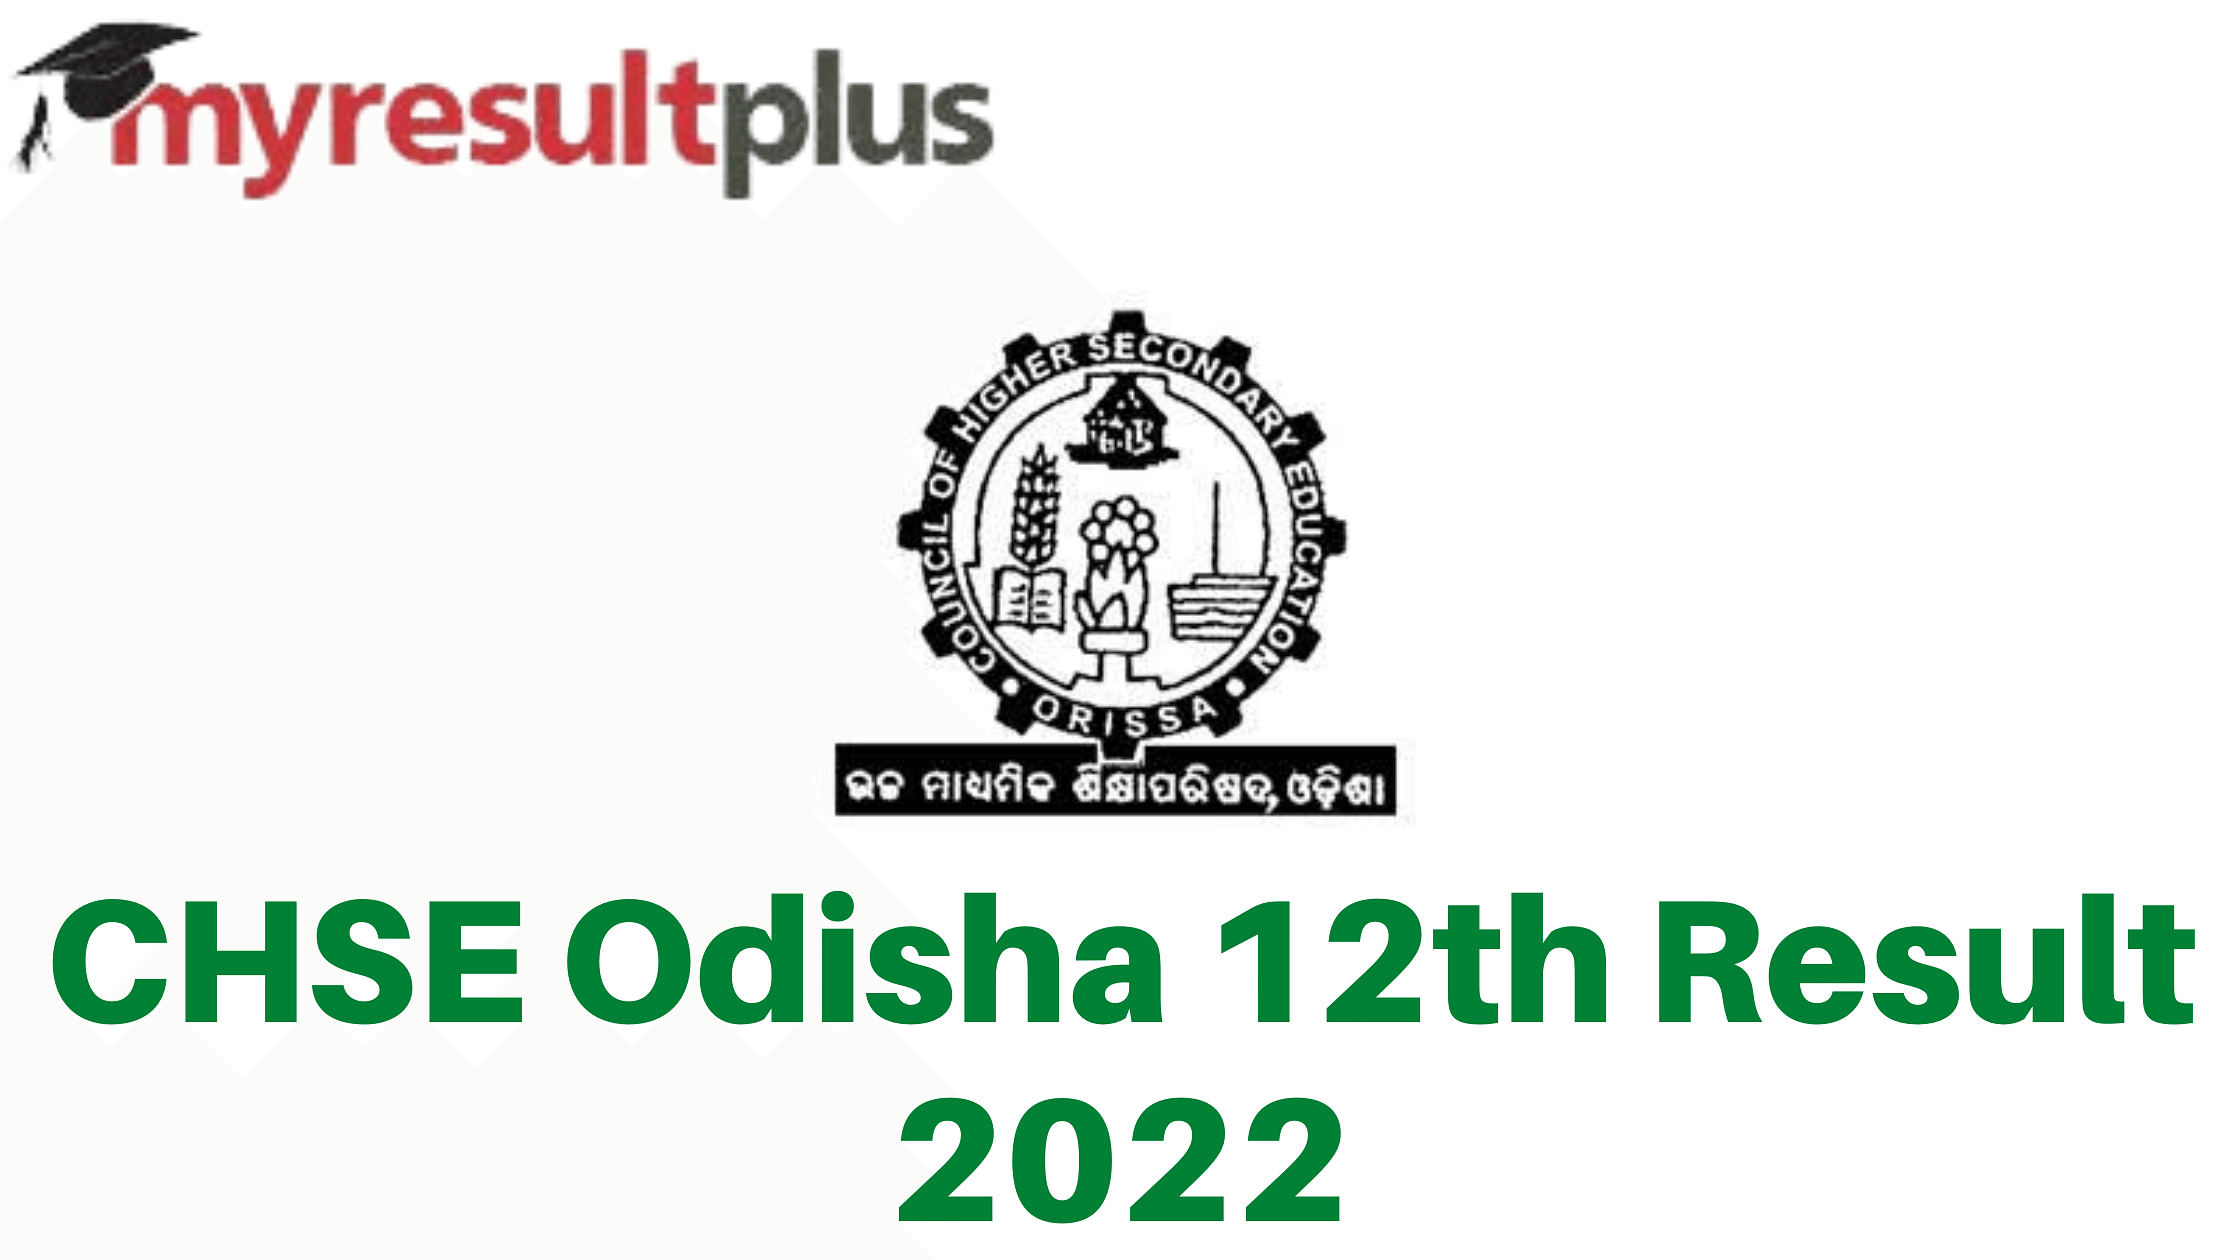 CHSE Odisha 12th Result 2022 Declared, Steps to Download Scorecards Here